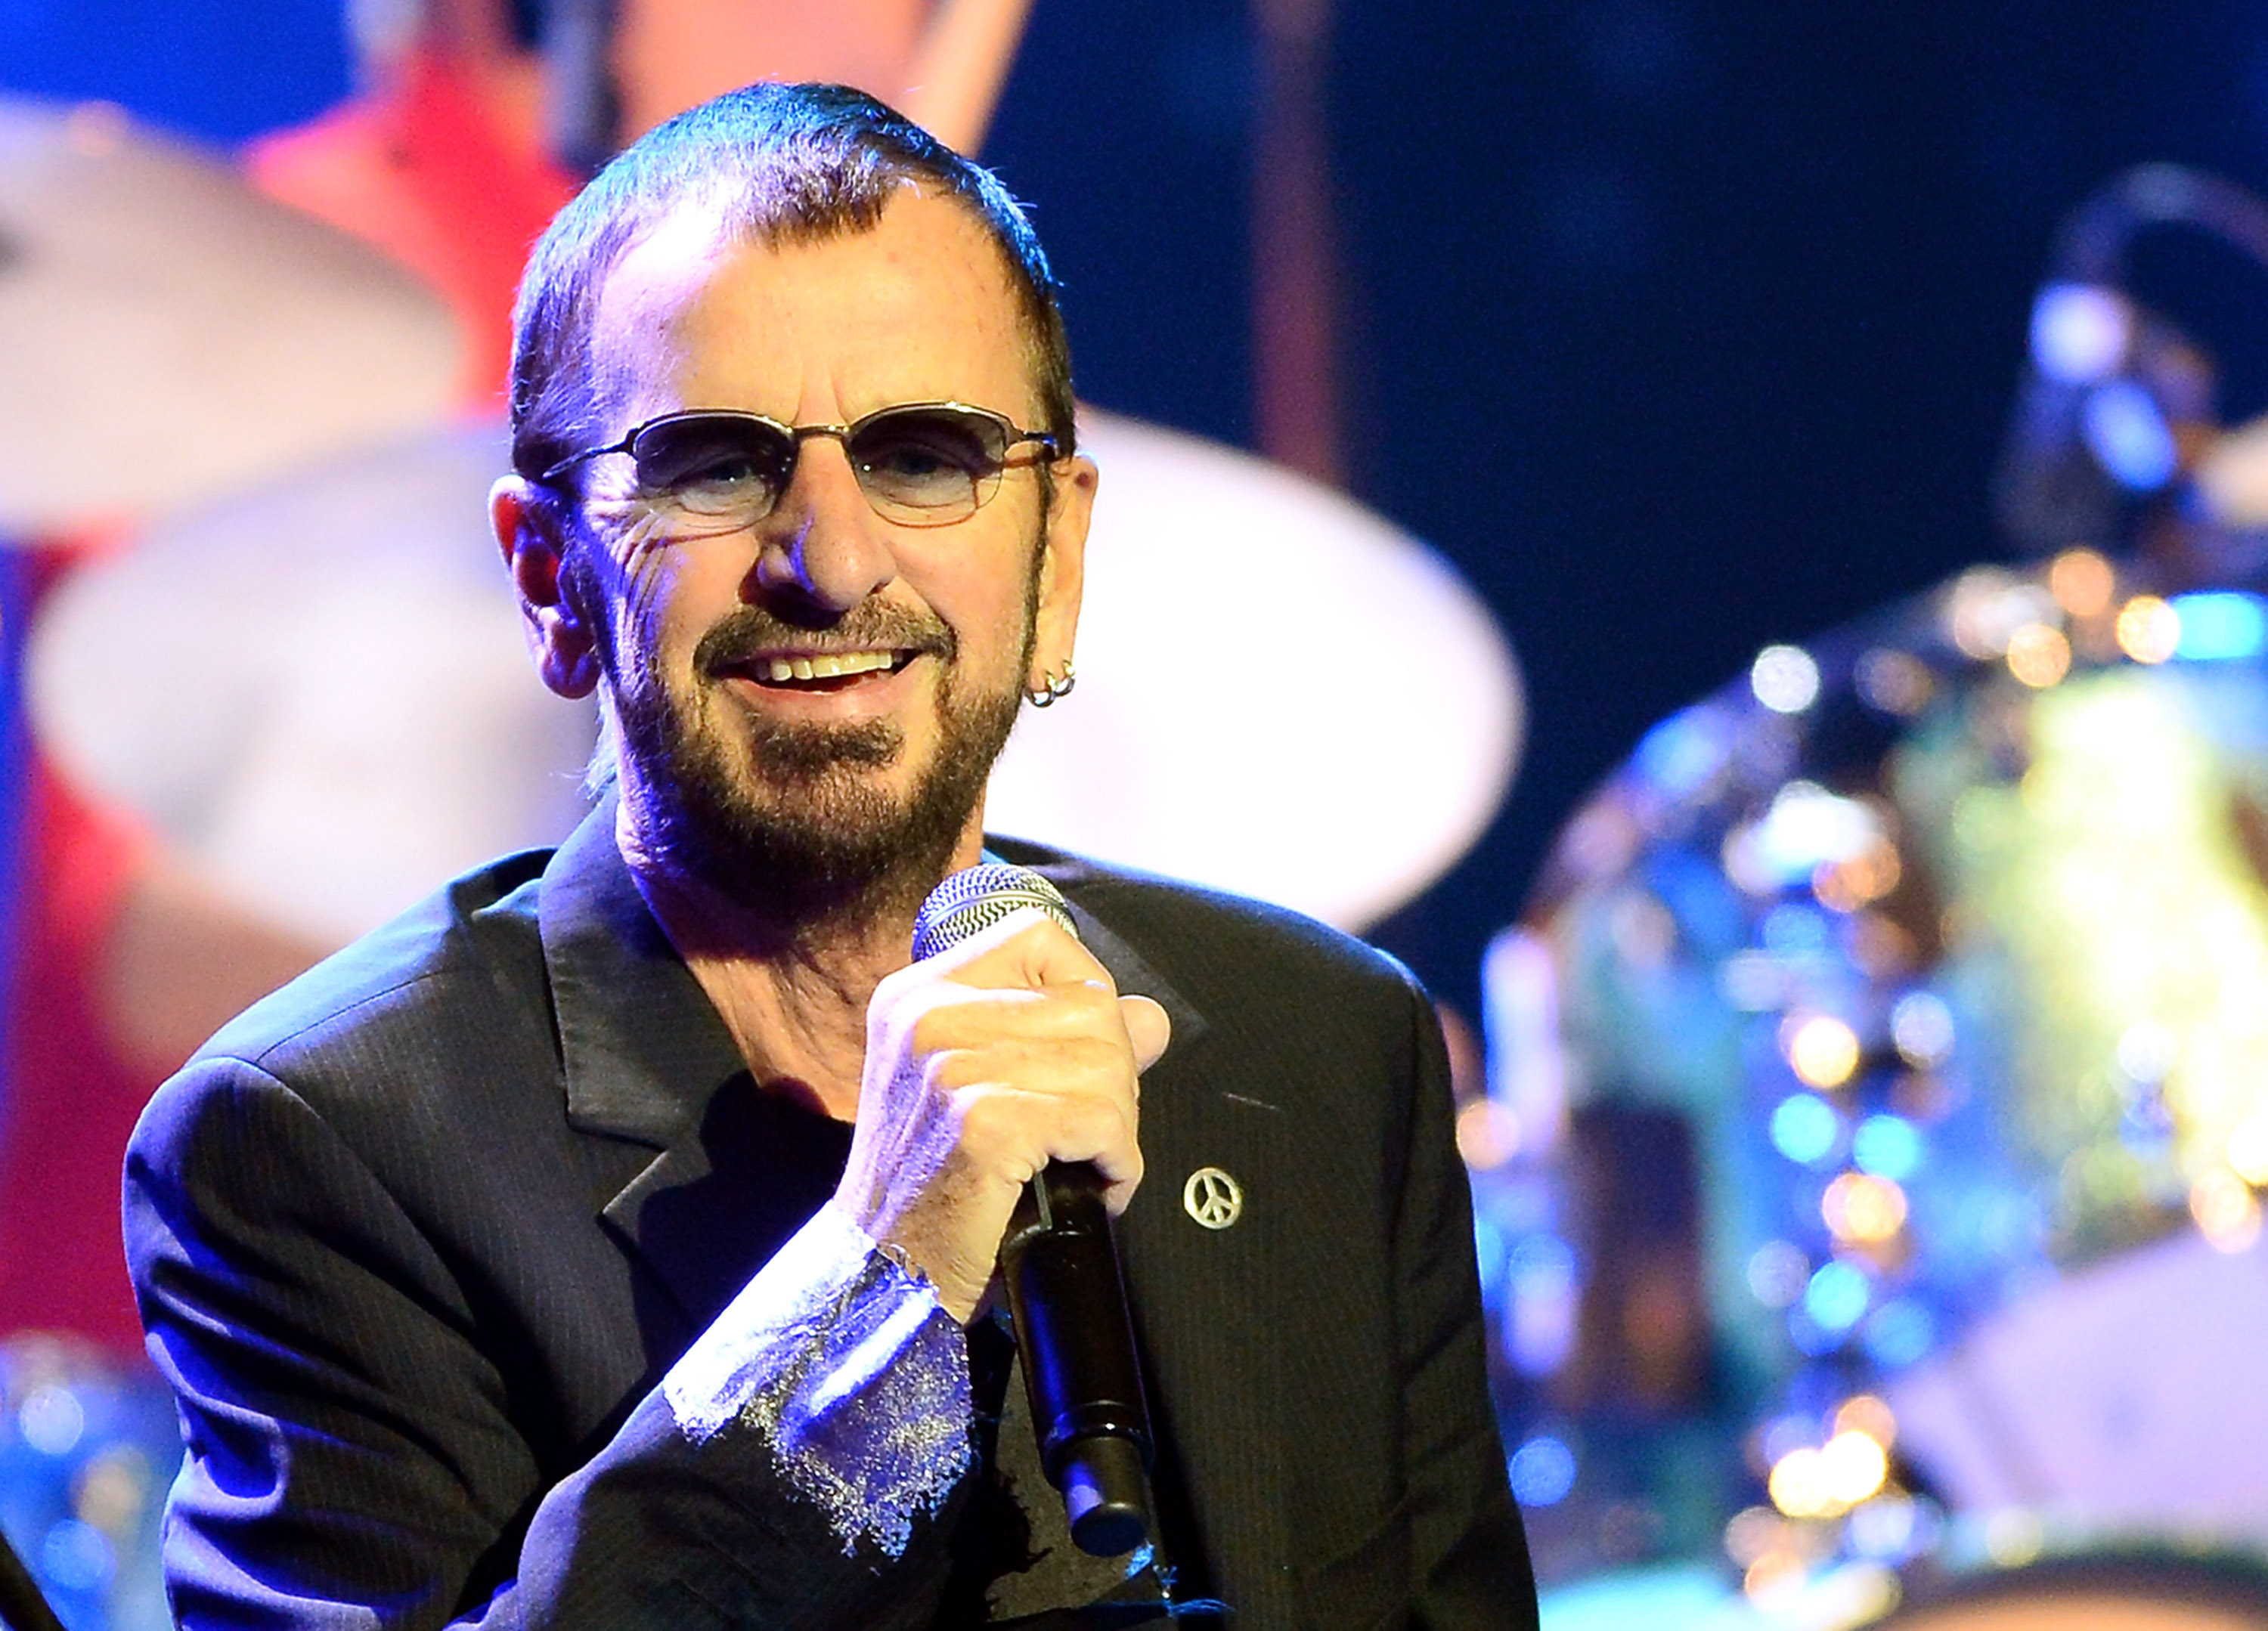 Ringo Starr of The Beatles performs with his All-Starr Band in Las Vegas, Nevada